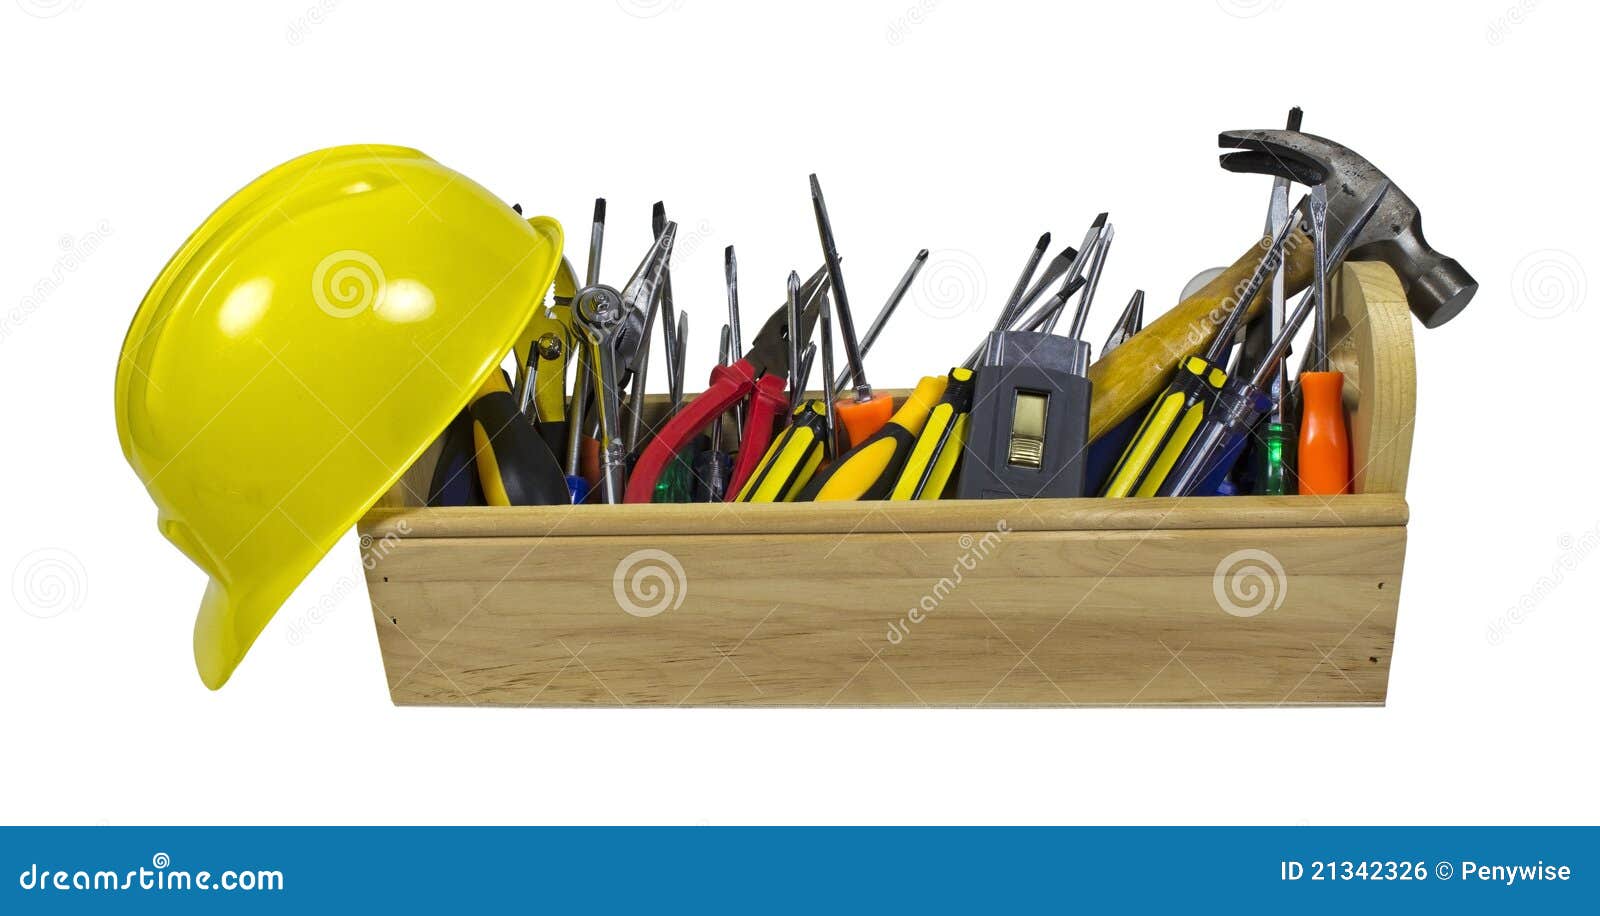 Yellow hard hat and long wooden toolbox full of tools - path included.